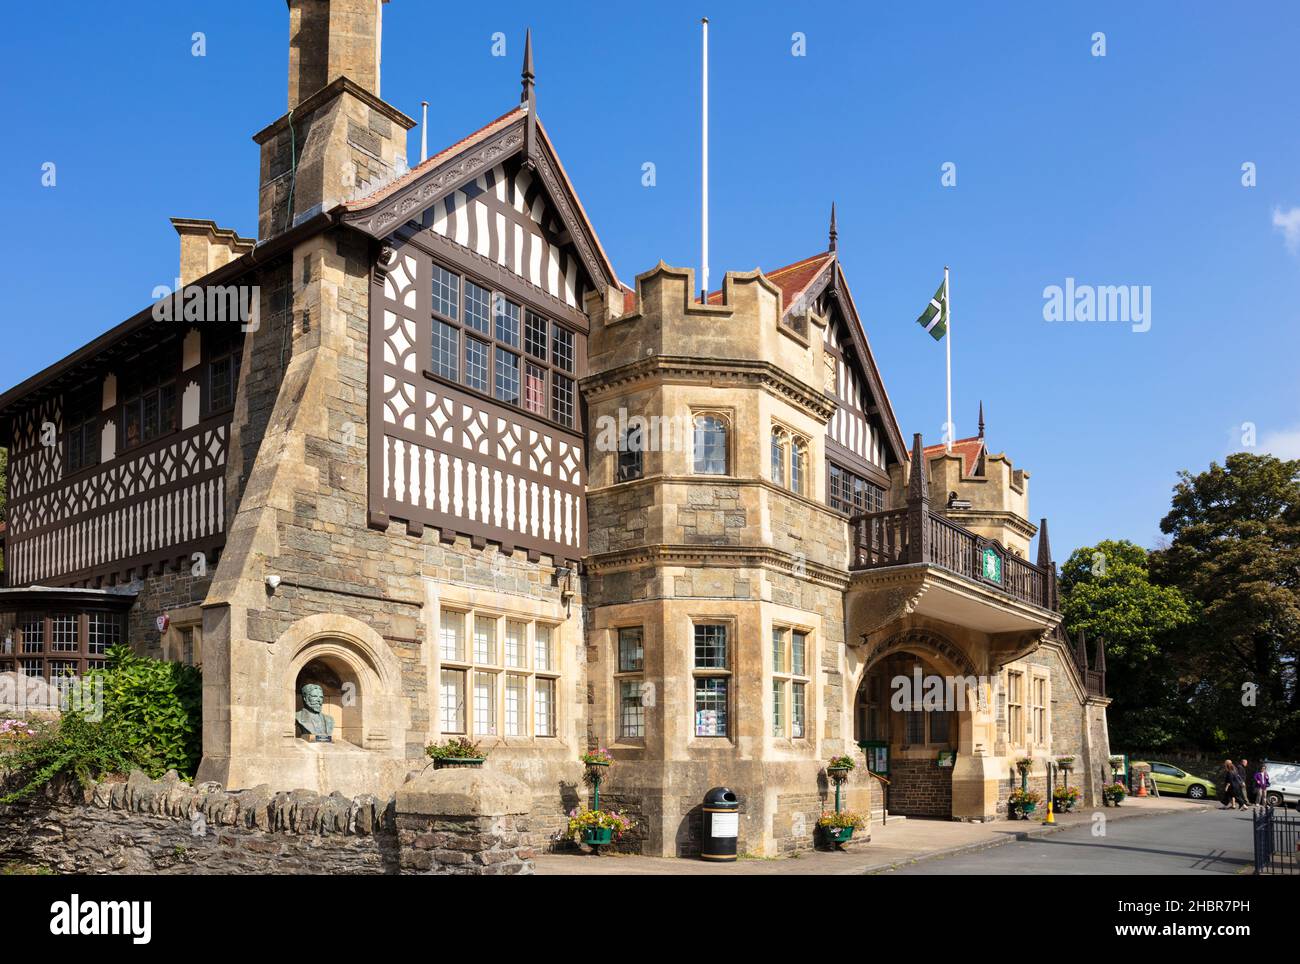 Lynton et Lynmouth Town Council Building Lee Road Lynton Devon Angleterre GB Europe Banque D'Images